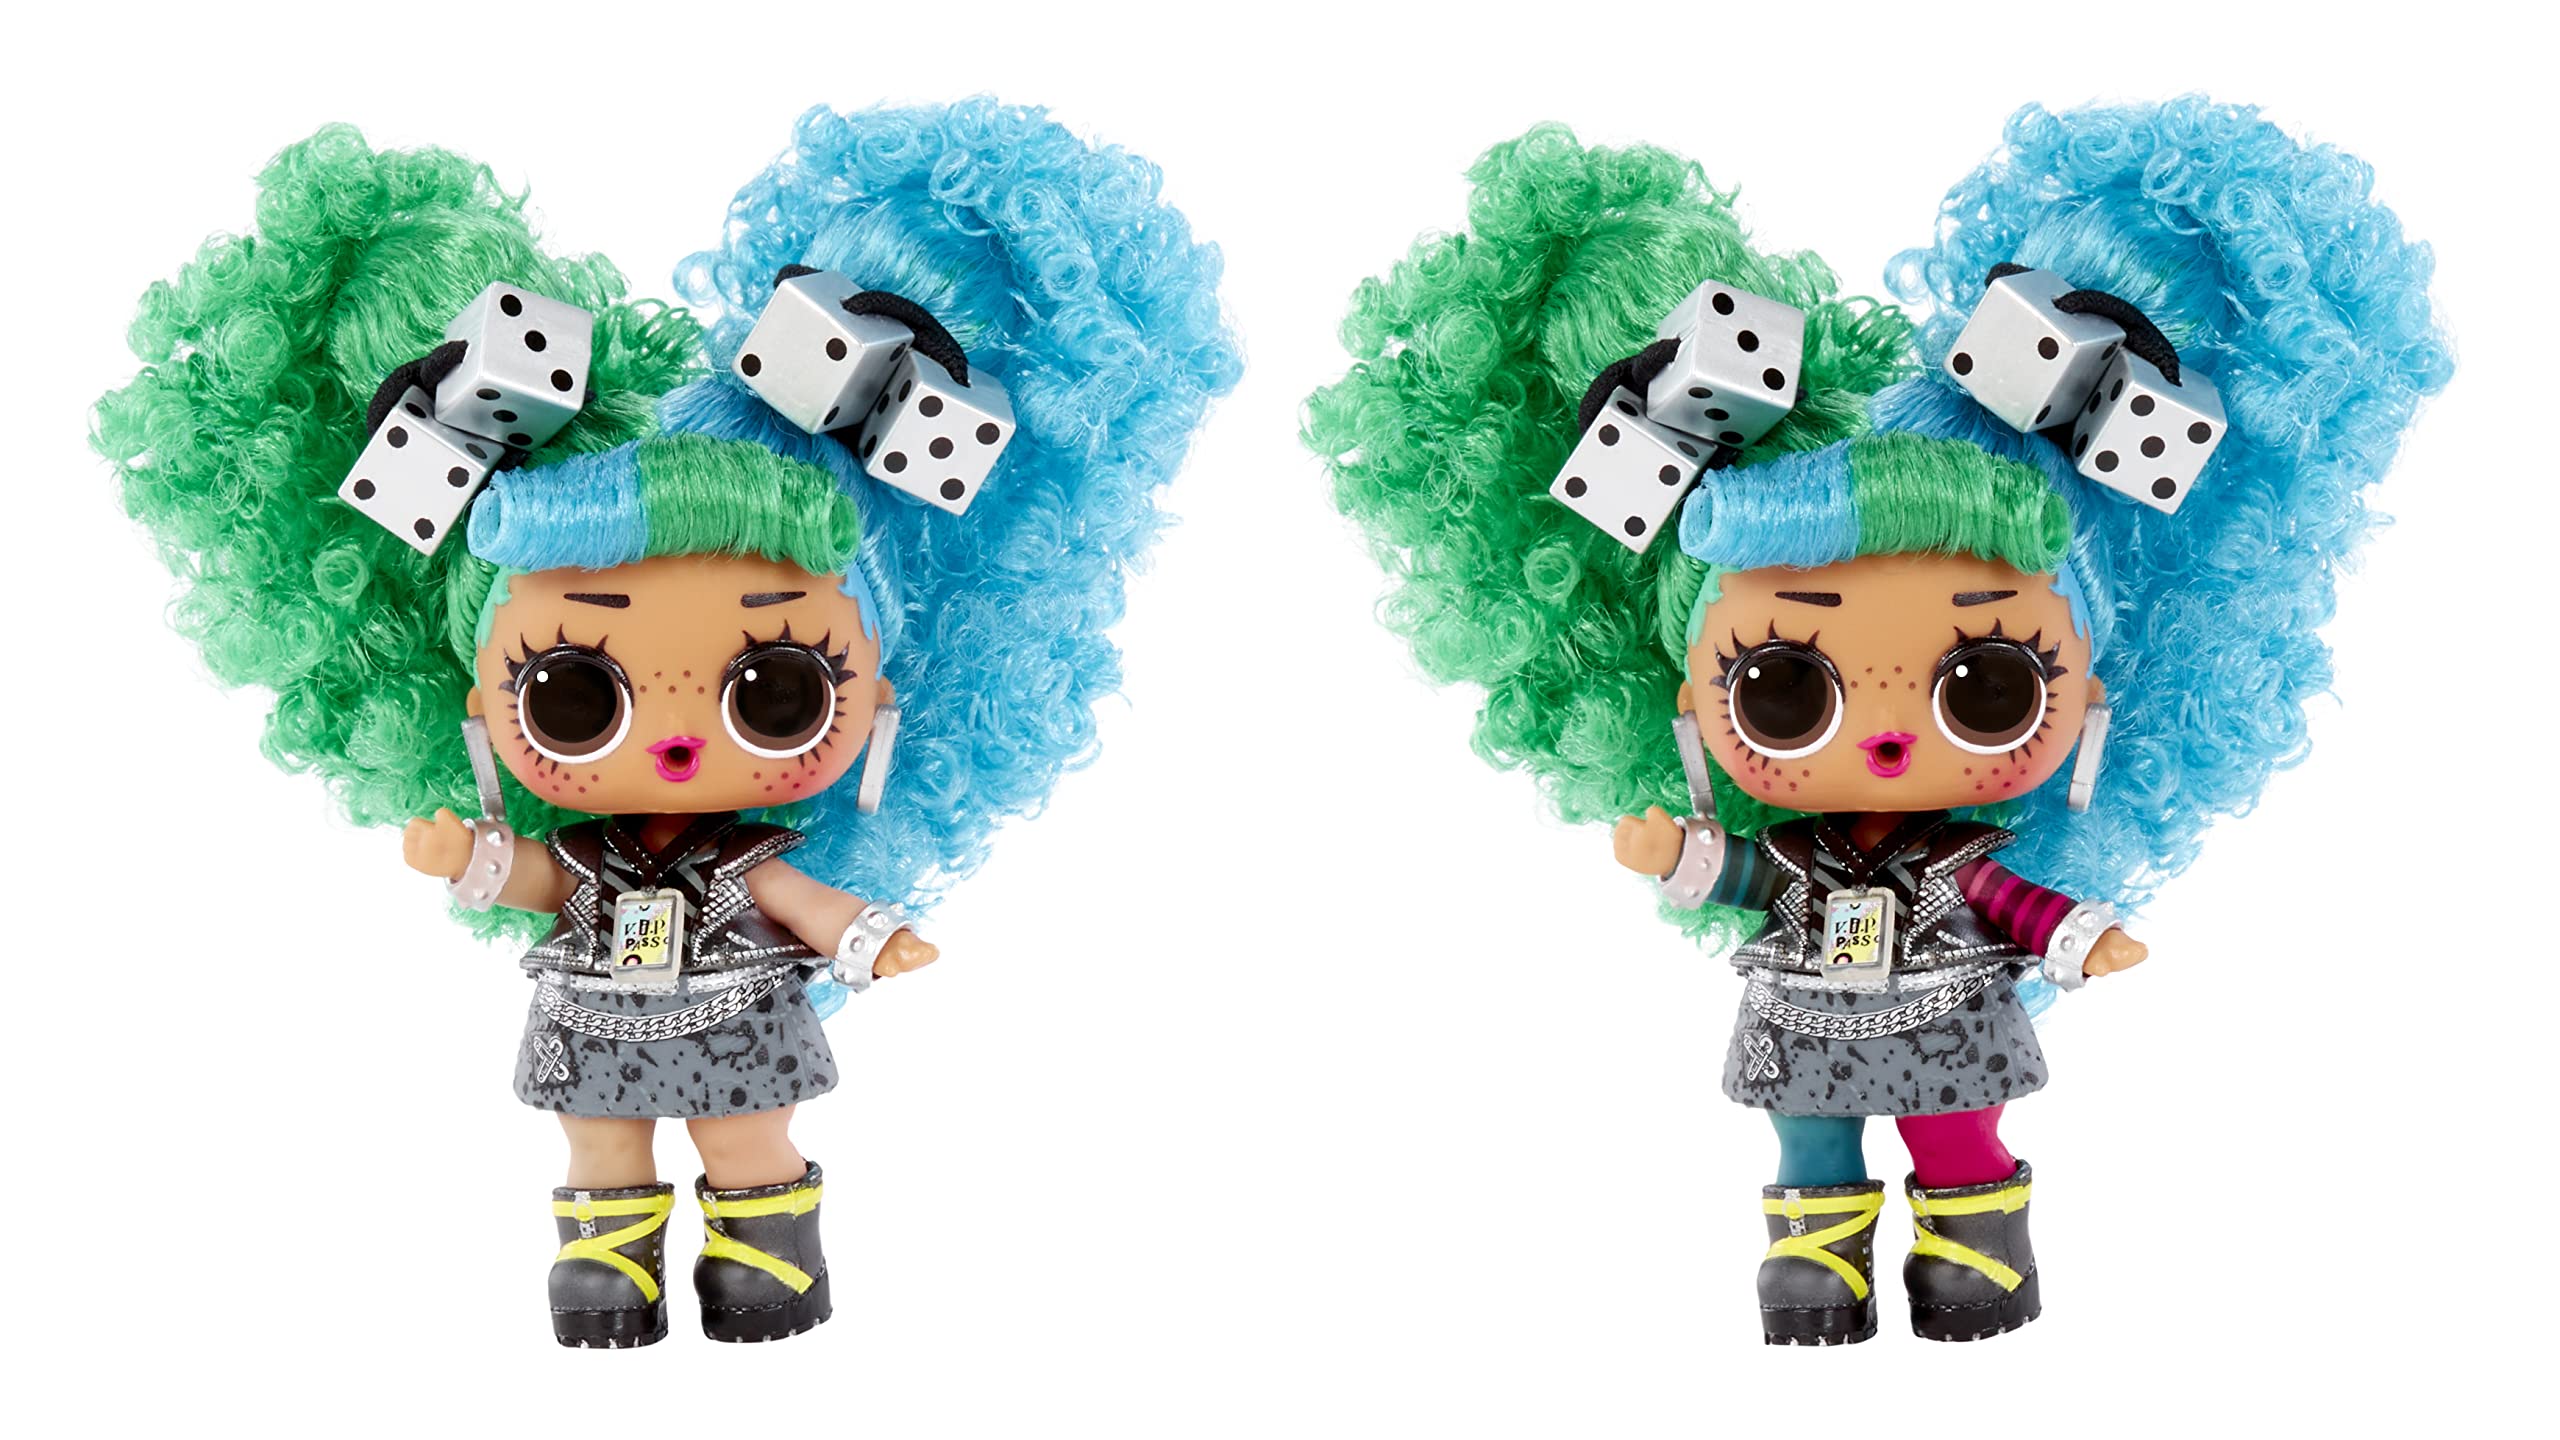 LOL Surprise Hair Dolls, Series 2 with 10 Collectible Doll with Real Hair, Including Stylish Fashion Accessories, Holiday Toy, Great Gift for Kids Girls Boys Ages 4 5 6+ Years Old